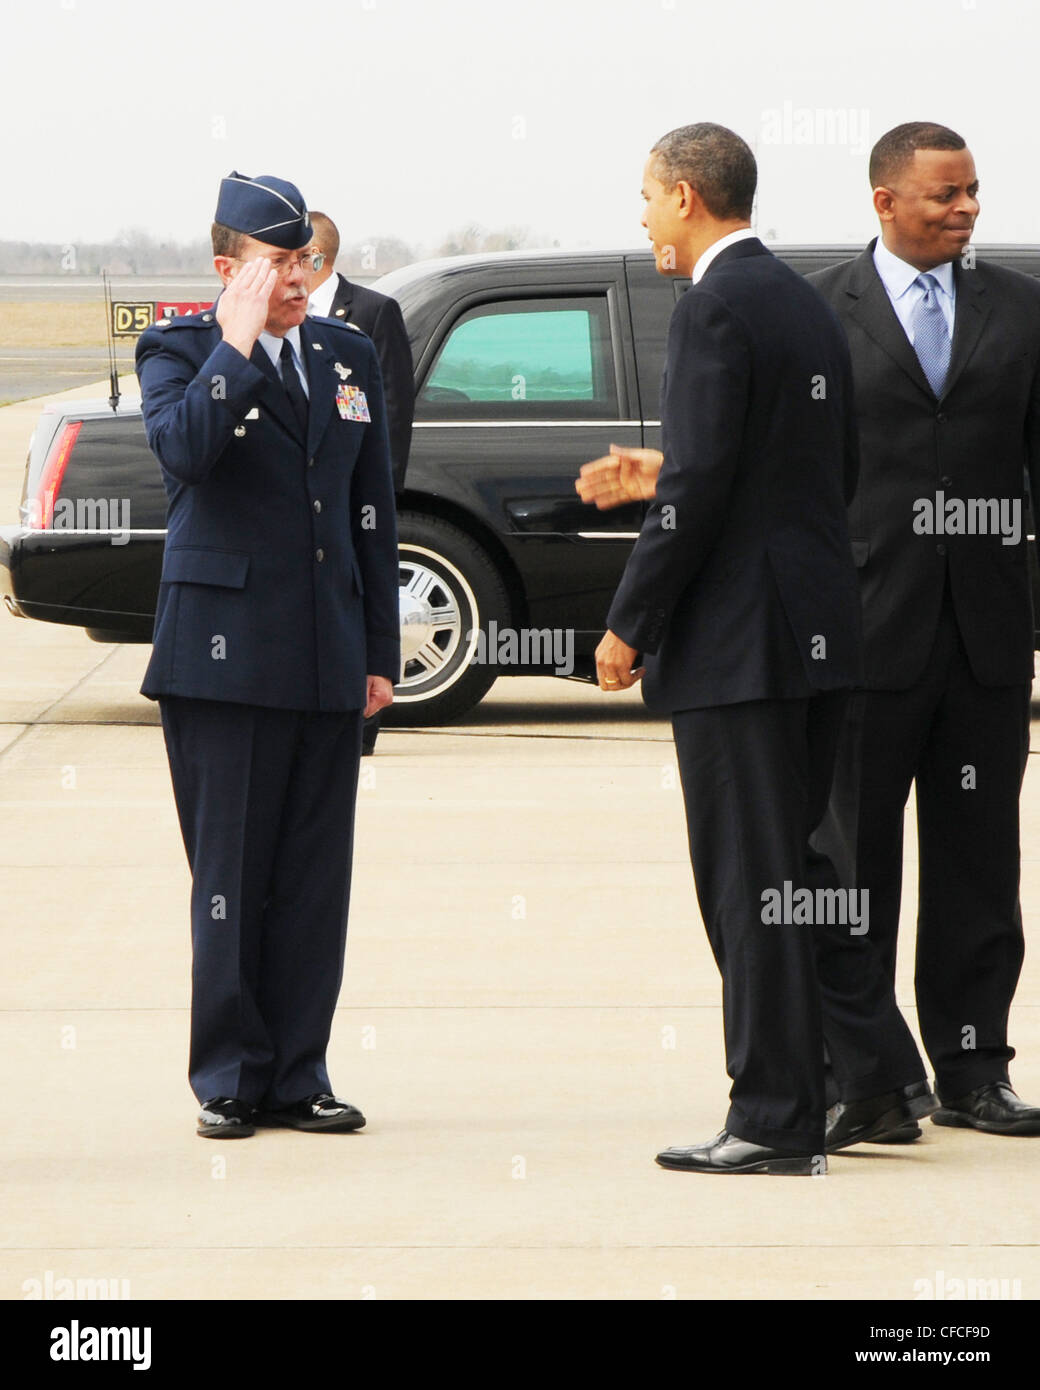 President Obama is welcomed by Lt Col Quincy Honeycutt upon arrival at the 145th North Carolina Air National Guard base in Charlotte, N.C. Stock Photo